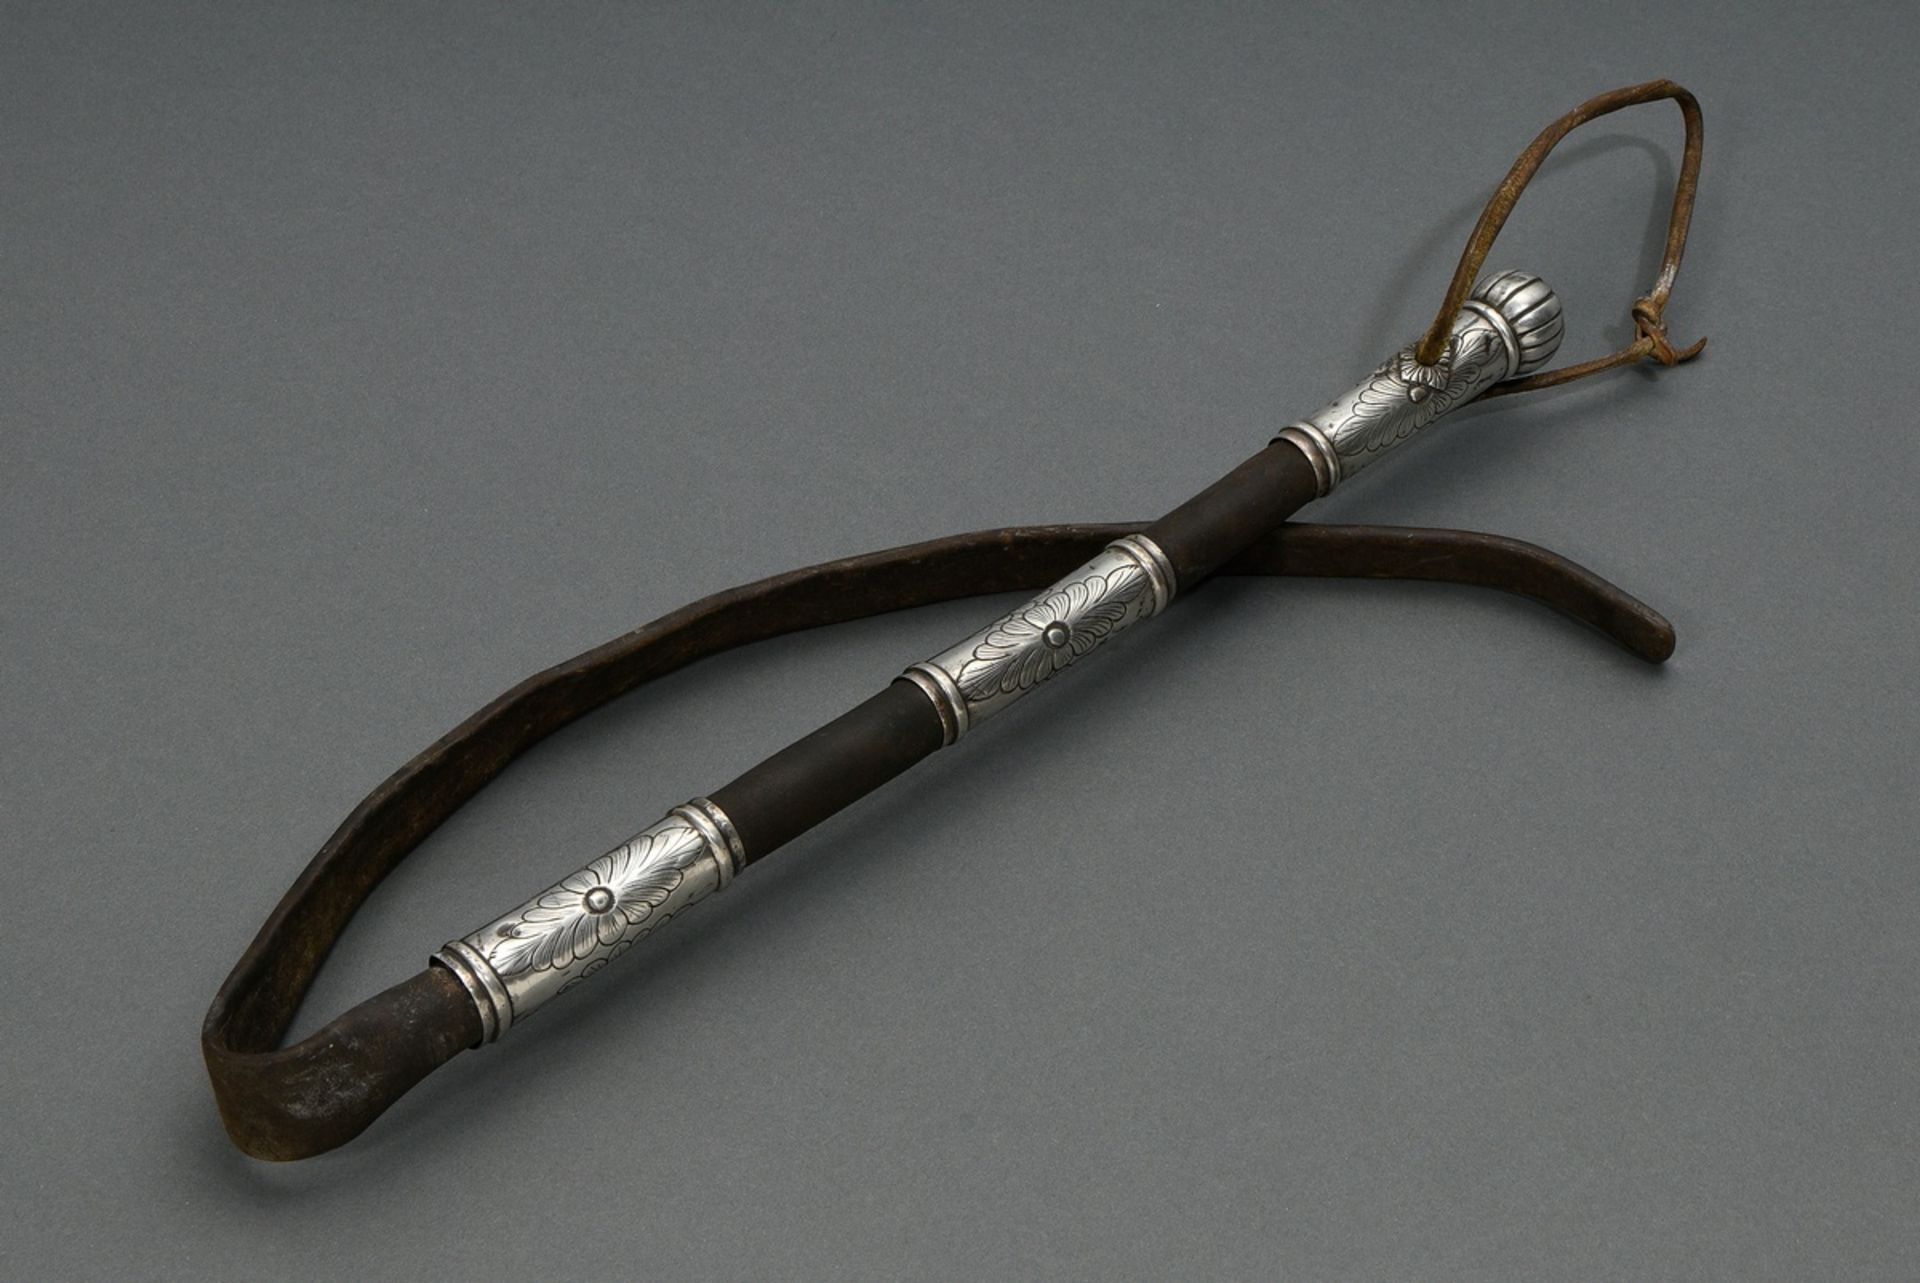 South American gaucho whip so-called Rebenque, leather with florally embossed silver cuffs and hand - Image 4 of 5